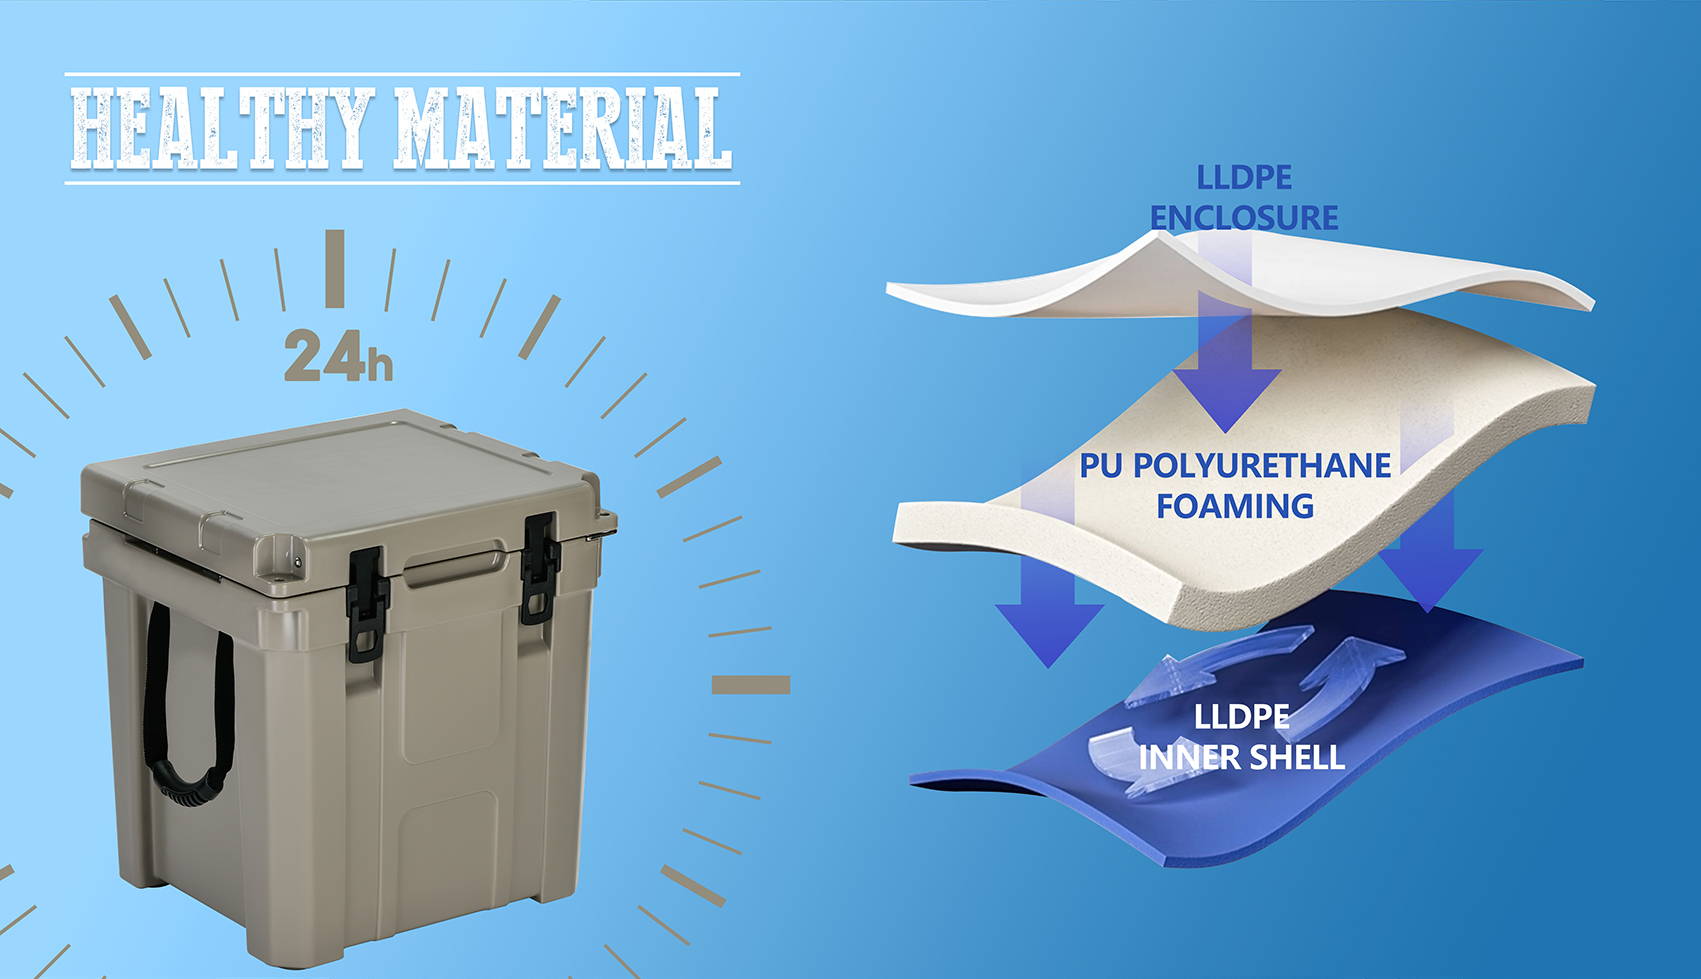 This cooler is made of healthy materials such as LLDPE ENCLOSURE, PU POLYURETHANE FOAMING, LLDPE INNER SHELL